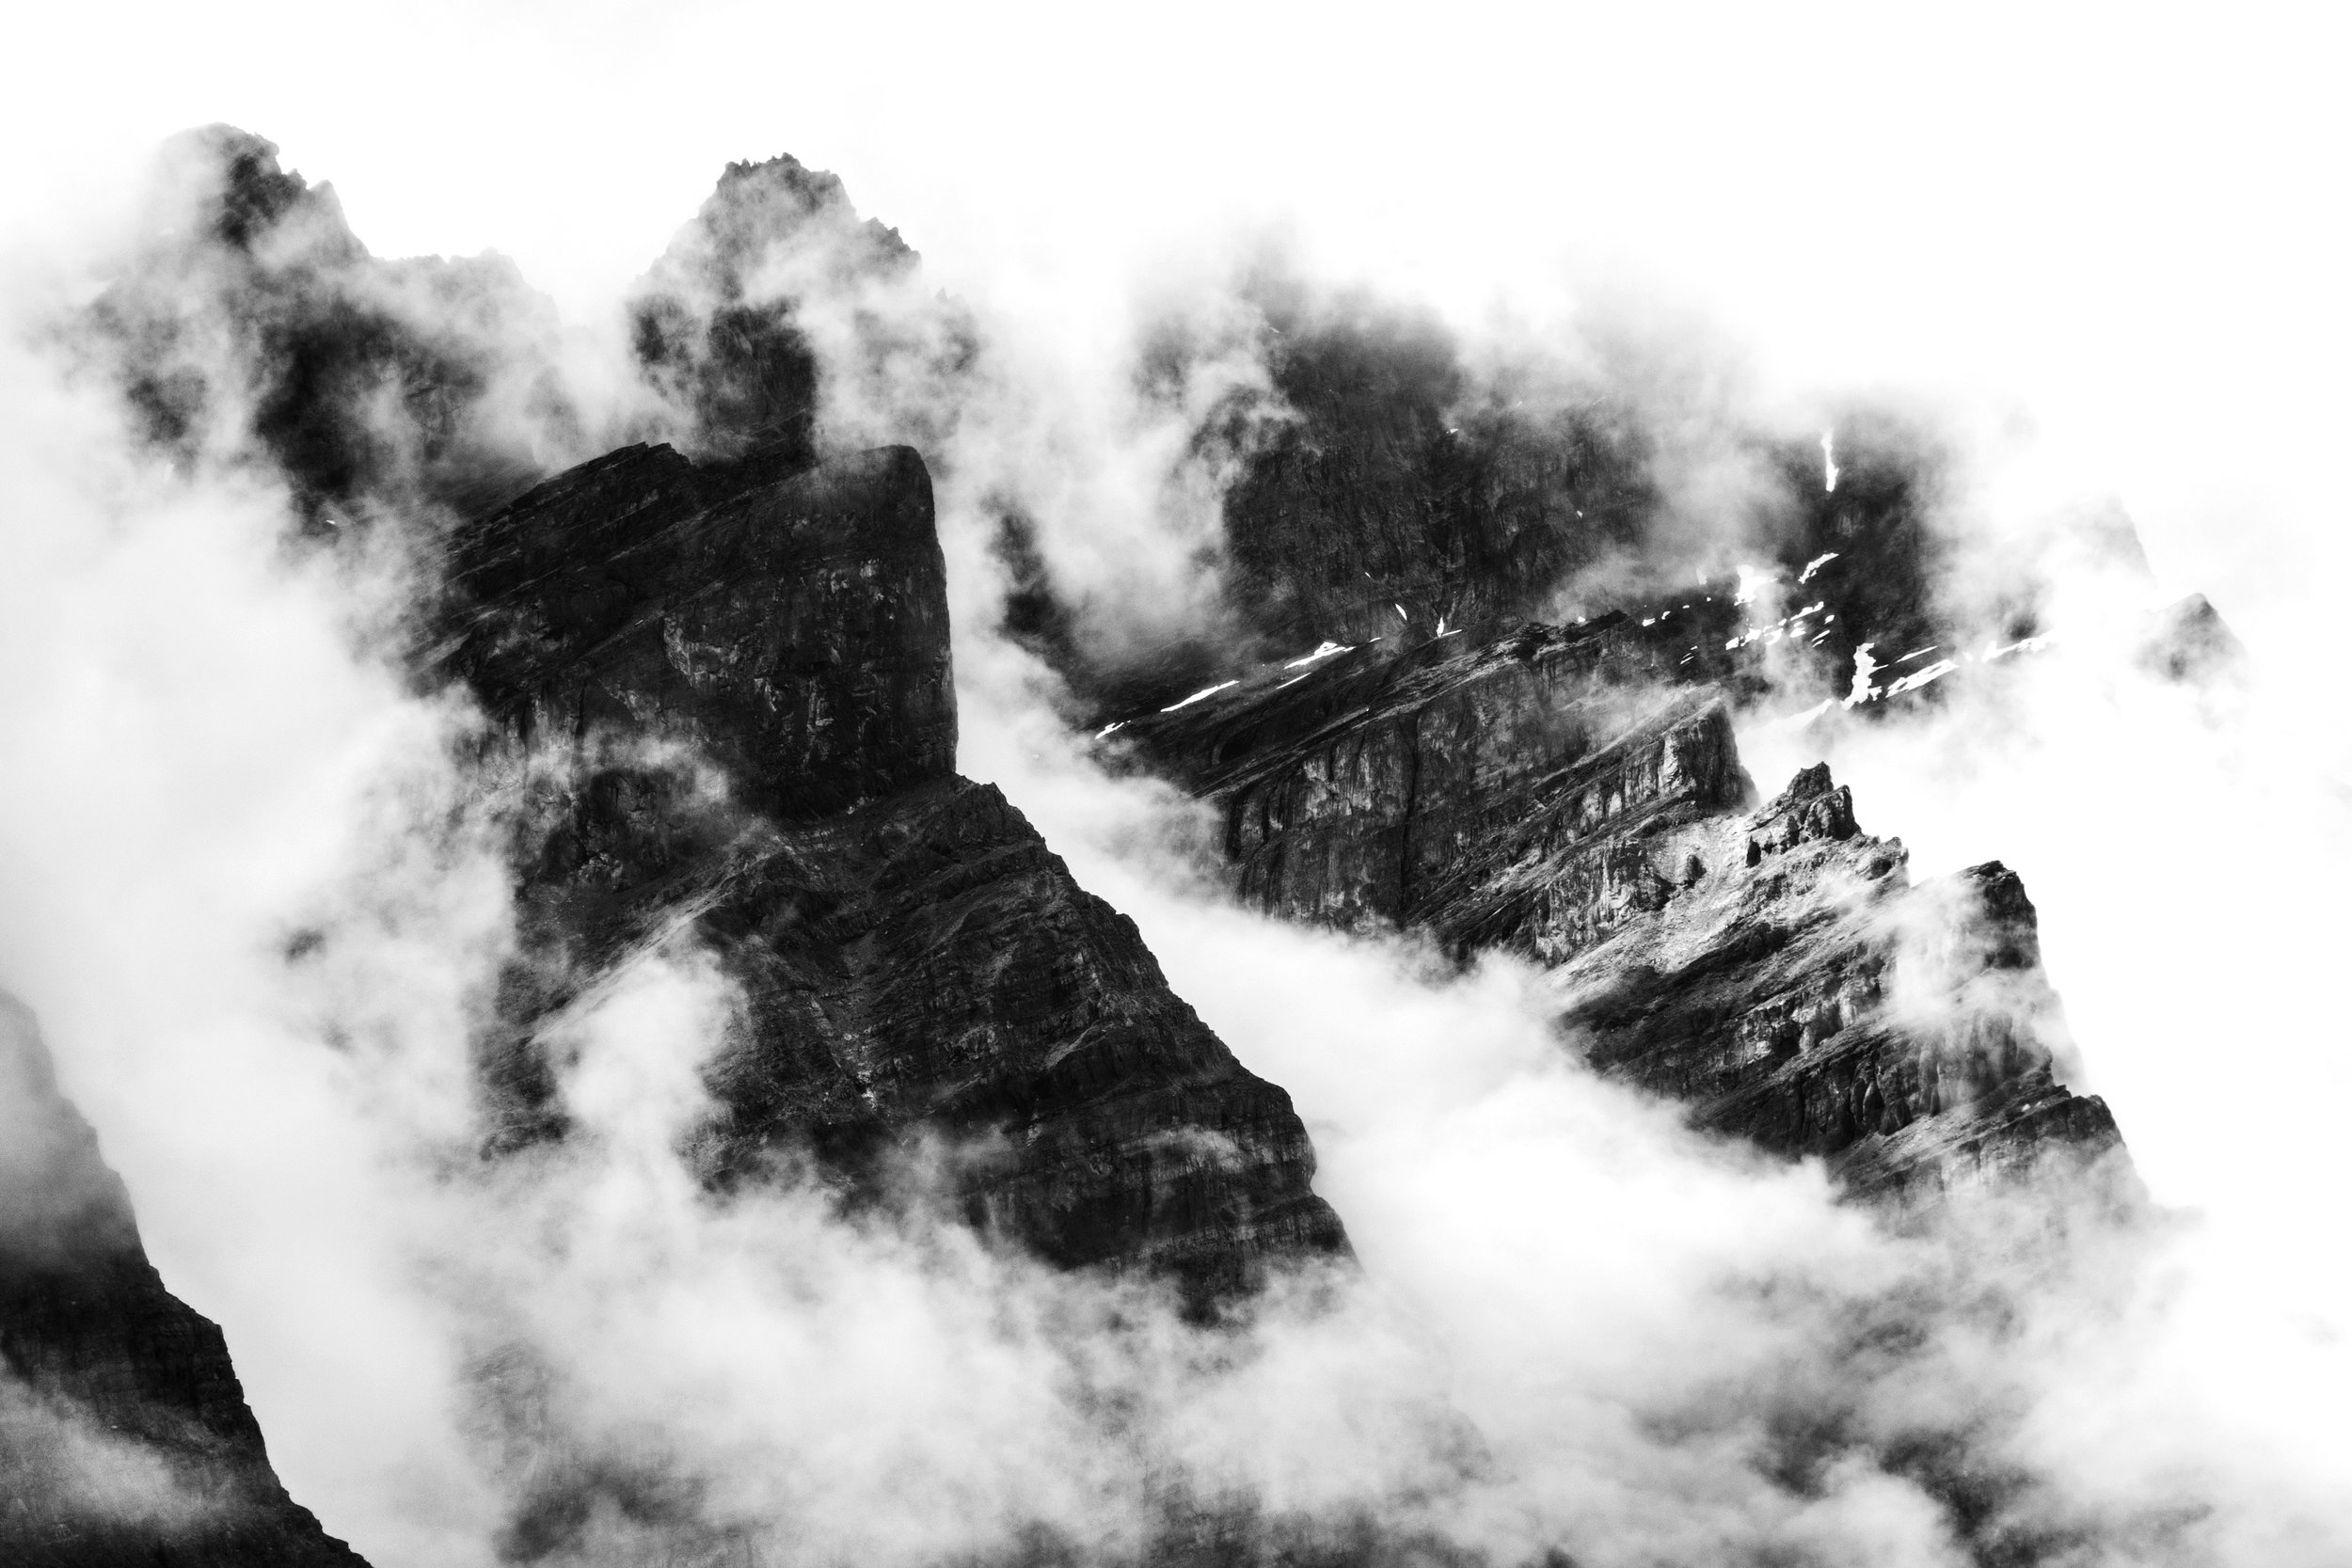 Mountains and Clouds Alberta Canada B&W.jpg